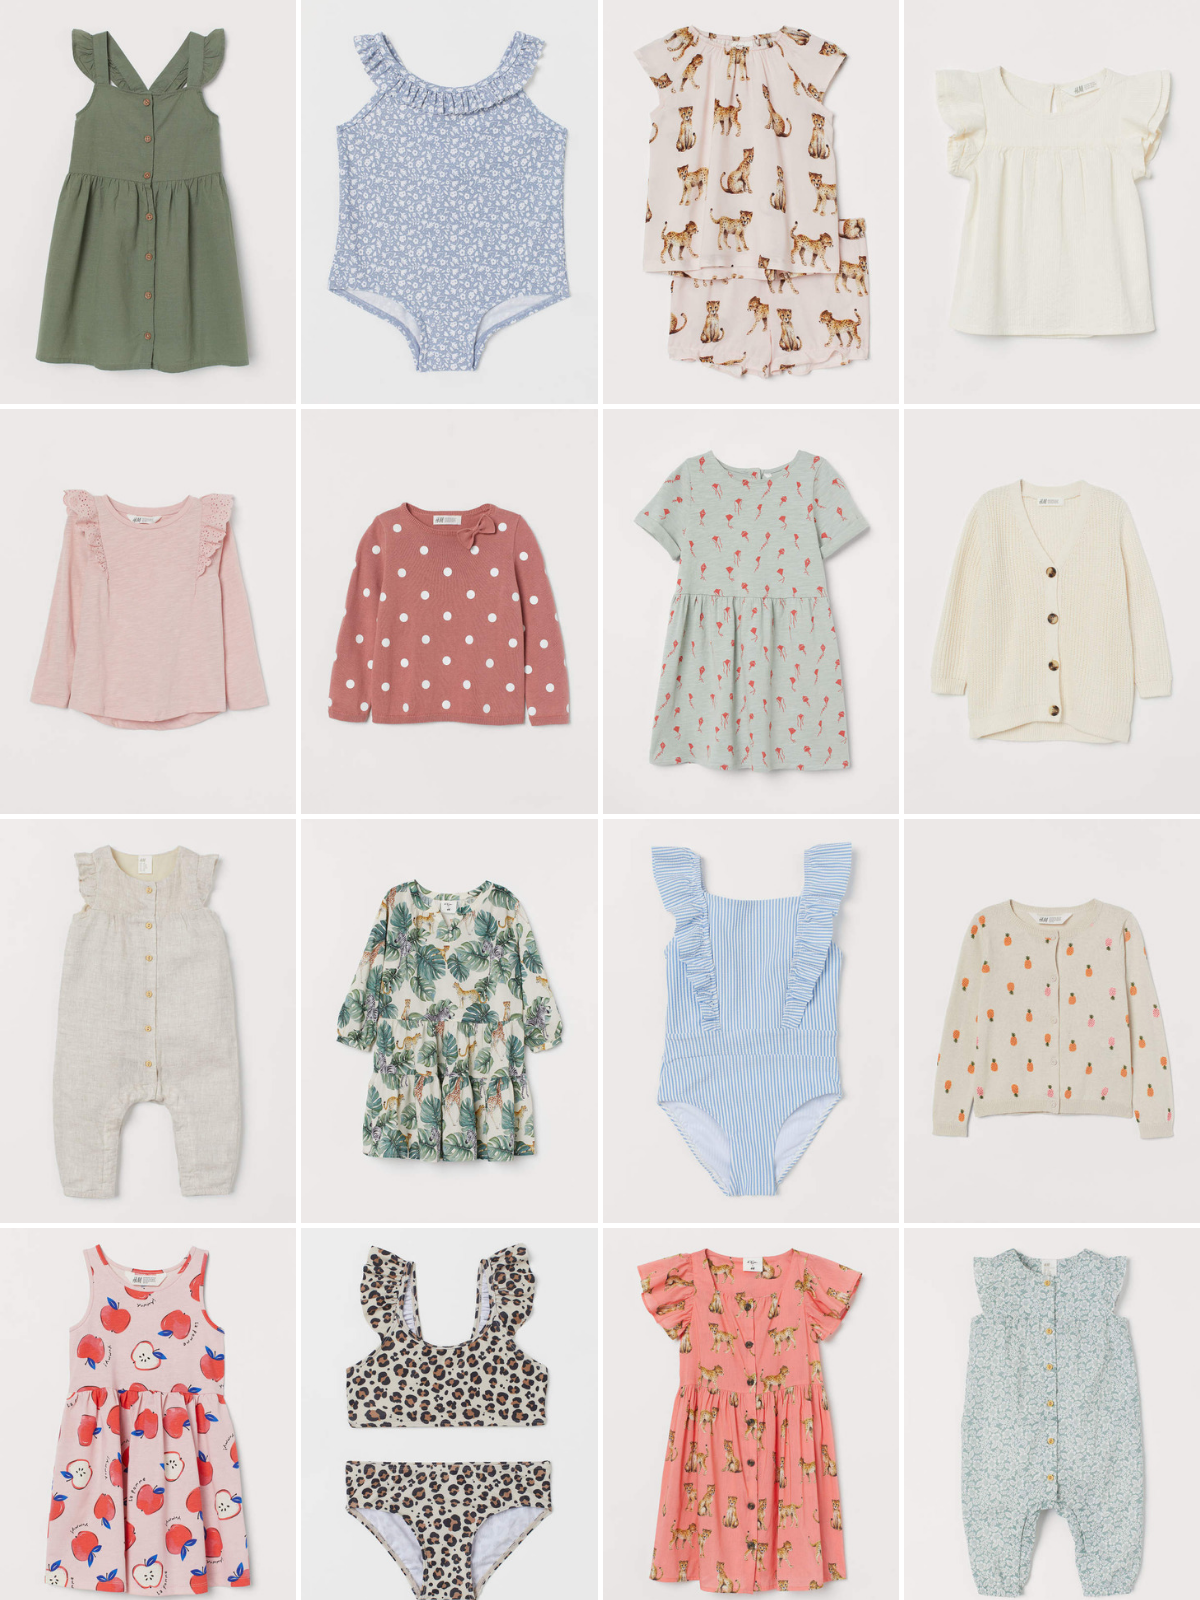 H&M Girls Clothes for Spring 2020